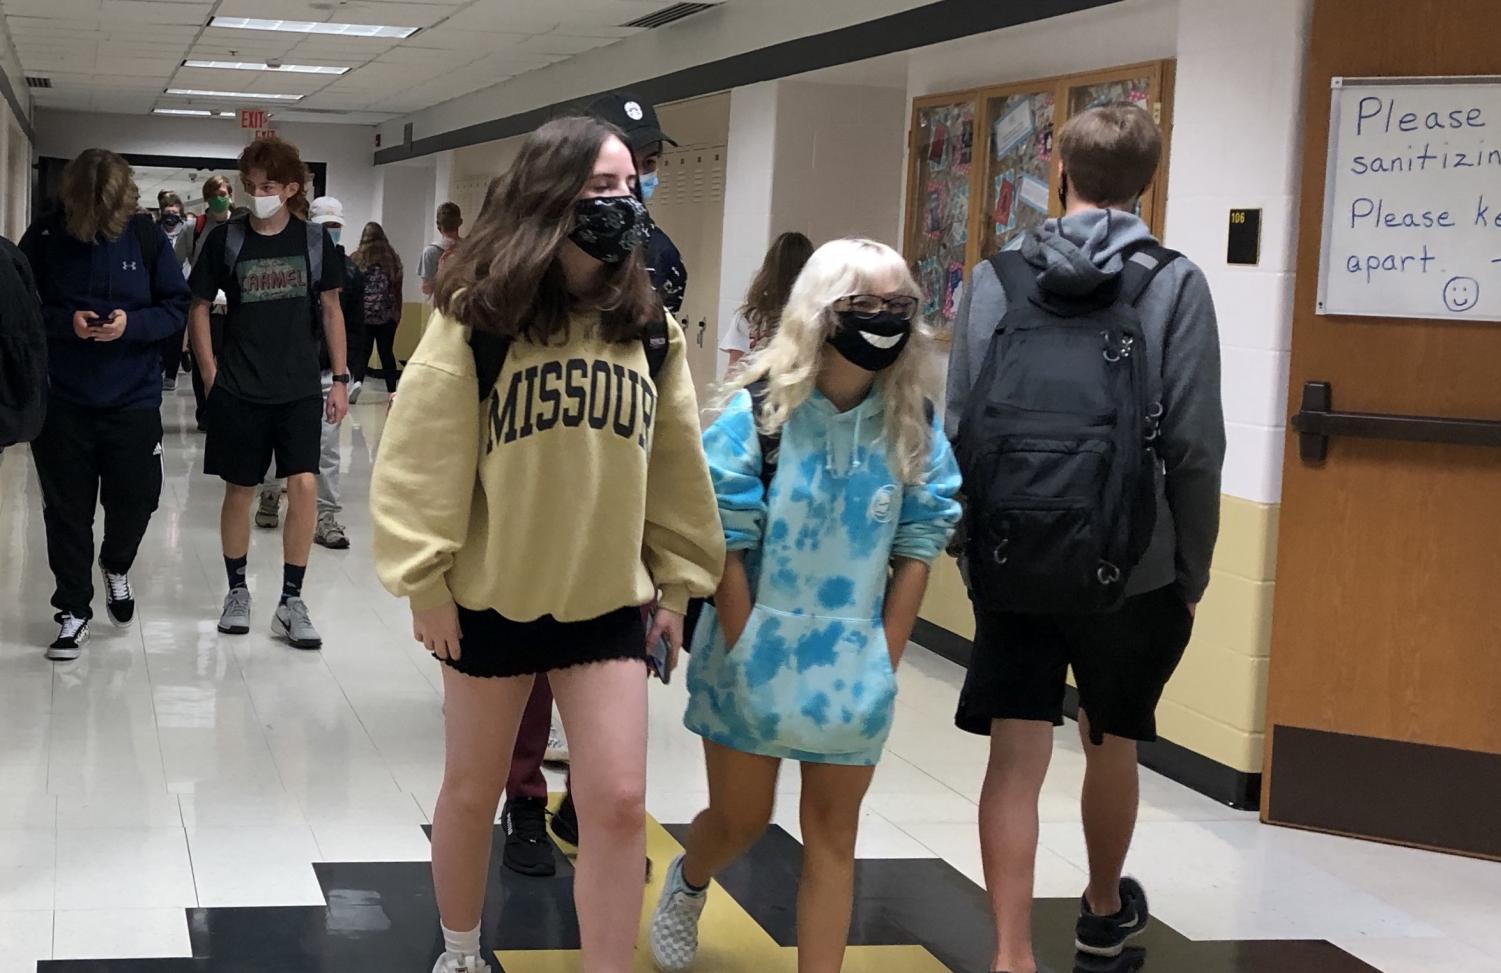 Students walk through the halls during passing period, wearing masks as per COVID-19 school protocol.